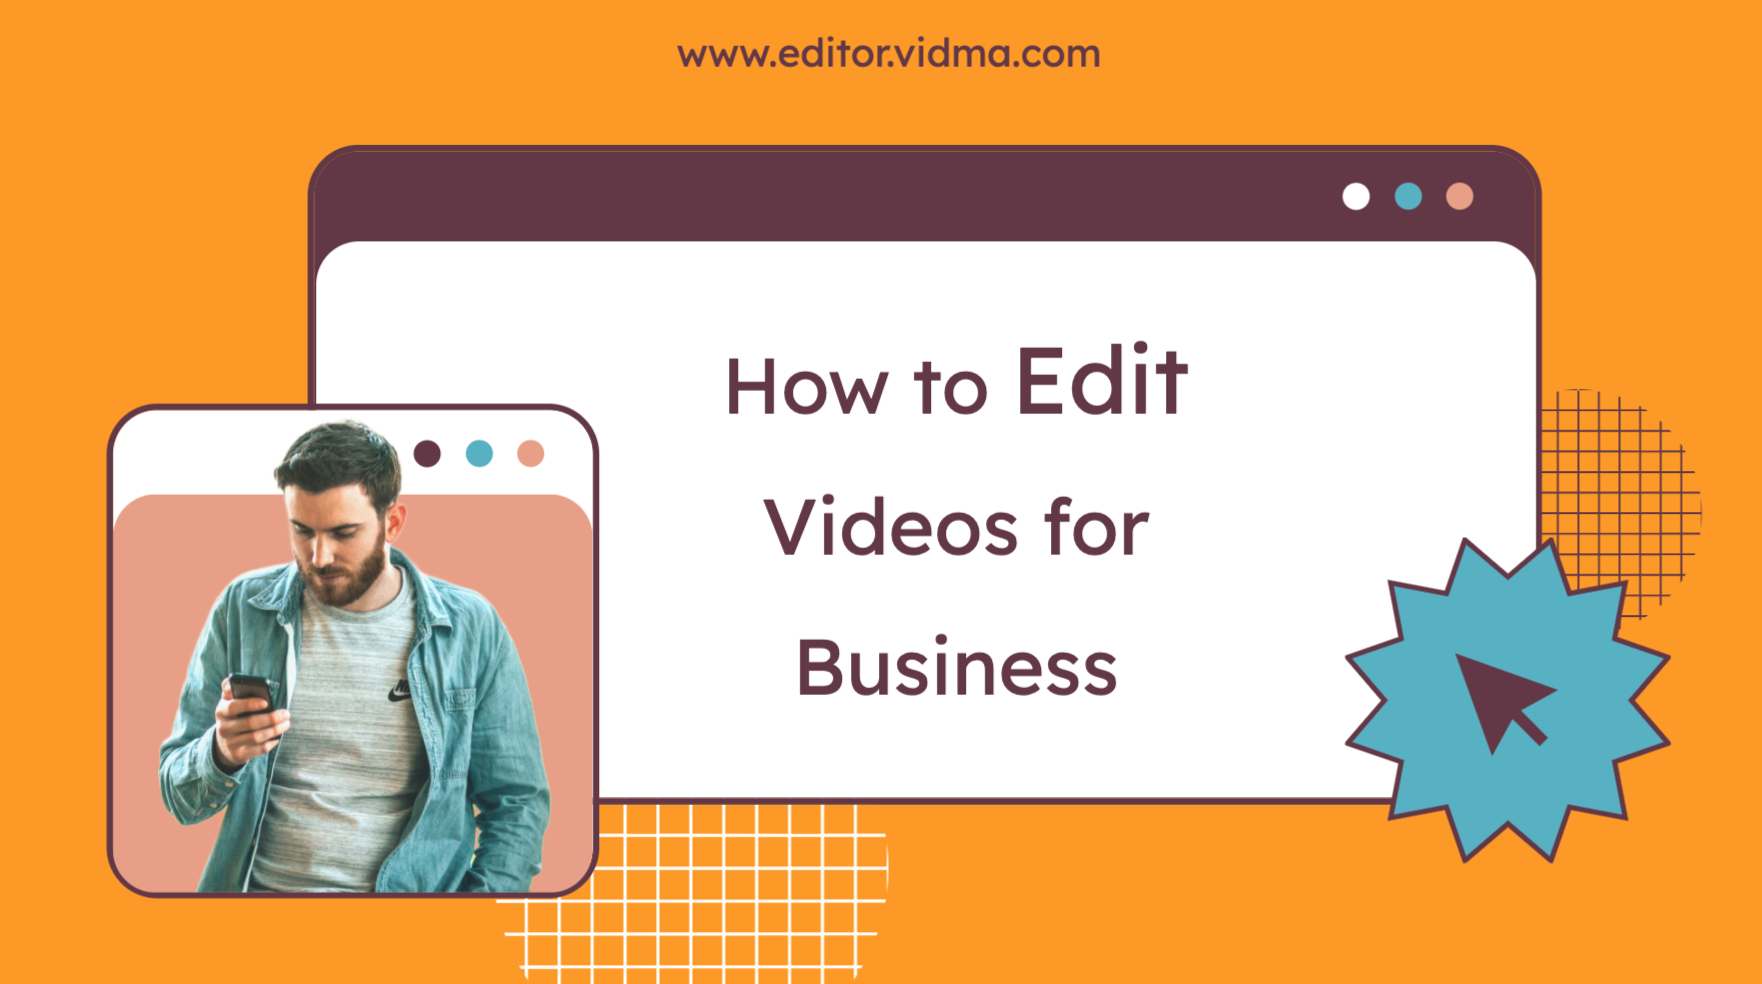 how to edit videos for business